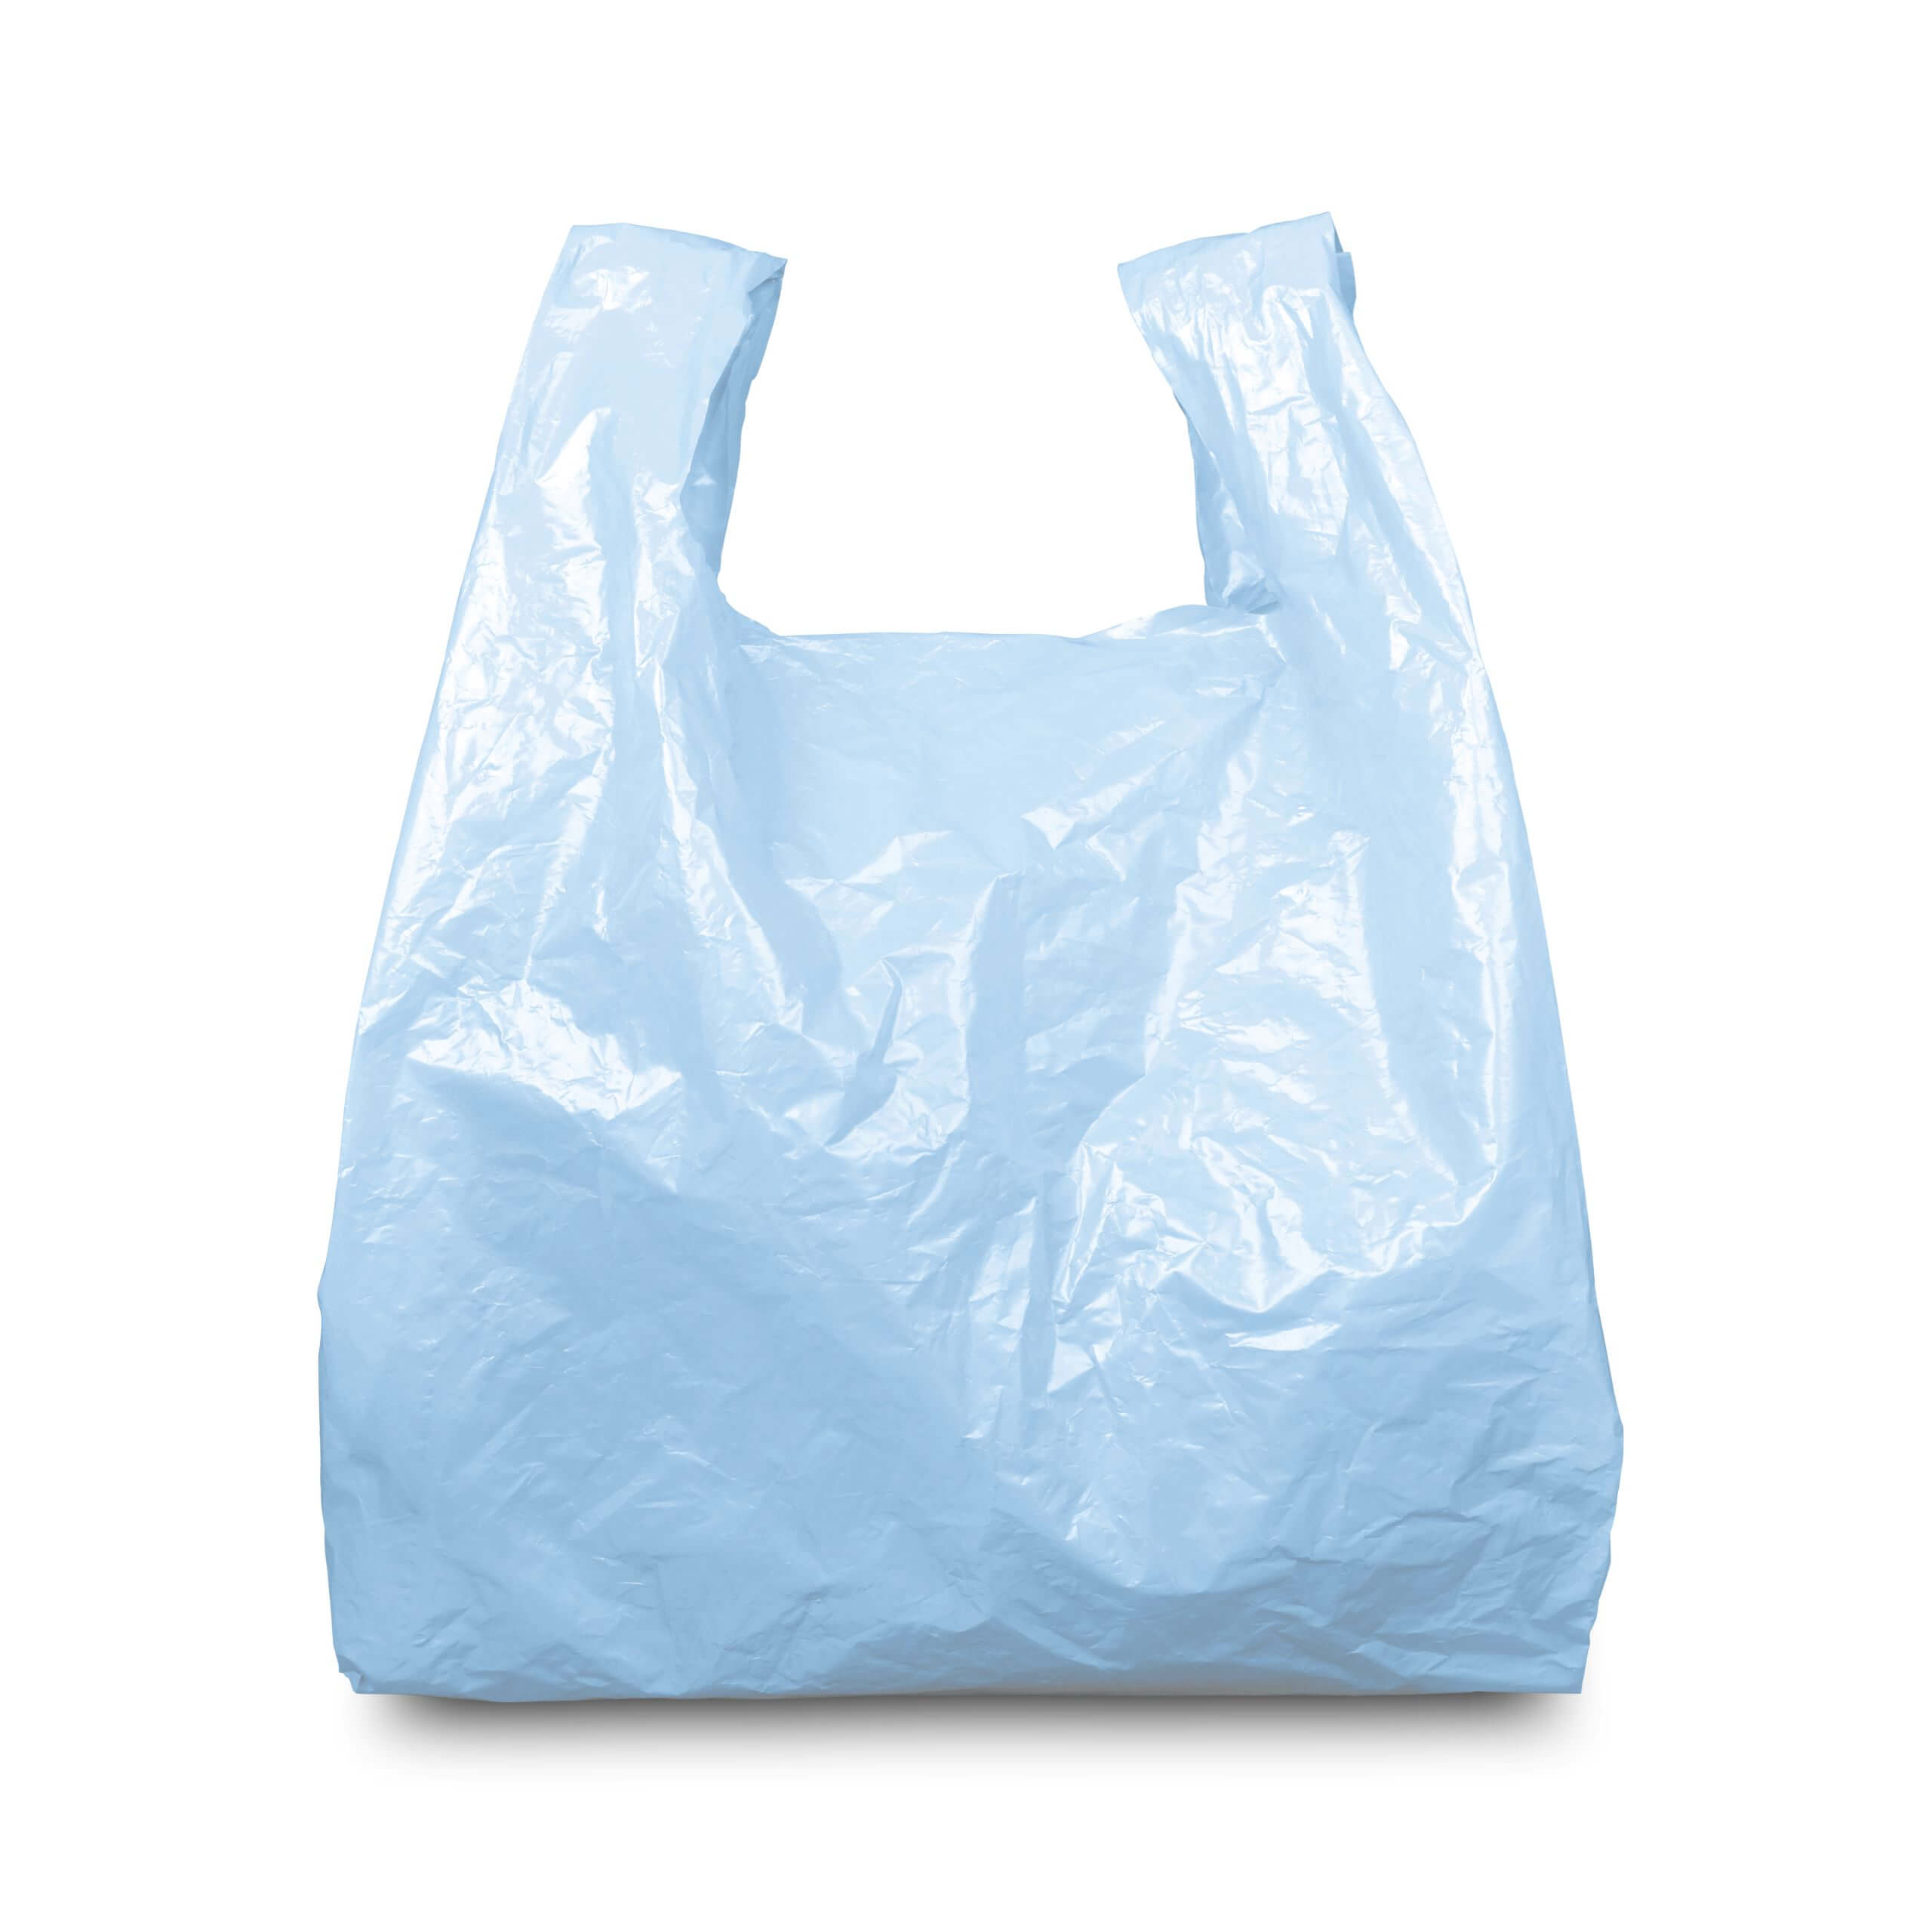 An image of our Vest Style Carrier Bags.